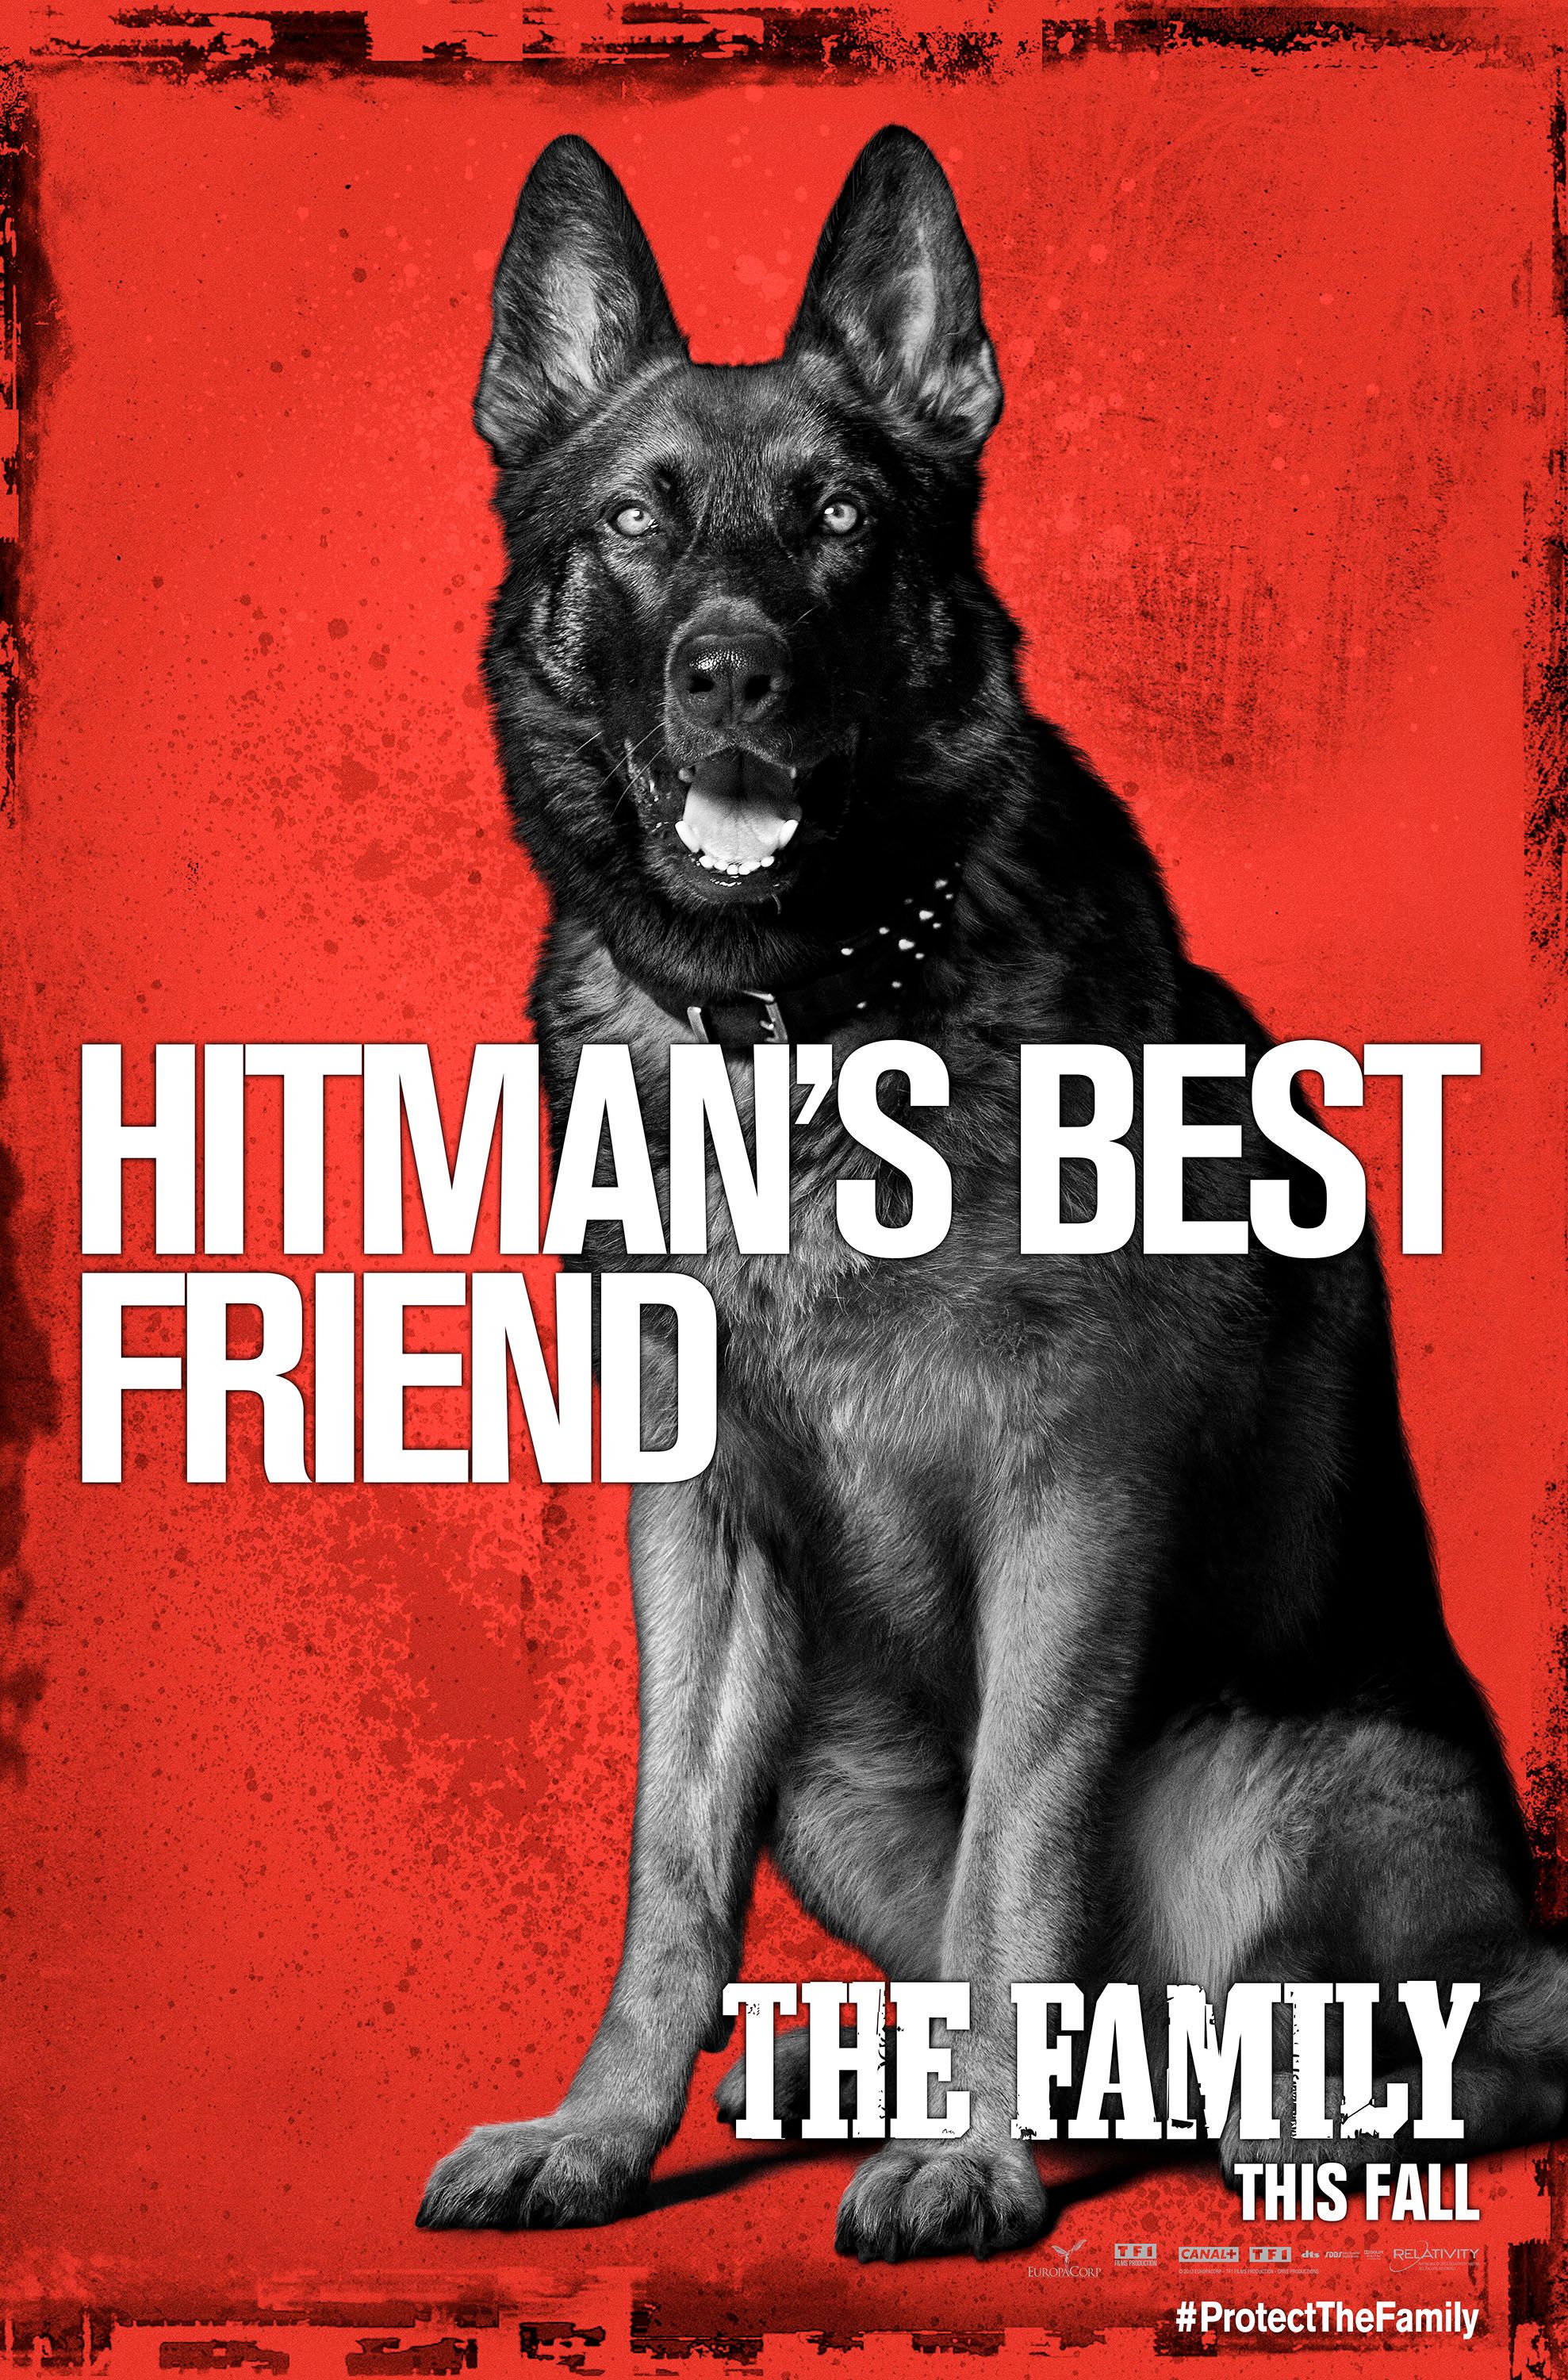 The Family Hitman's Best Friend Character Poster